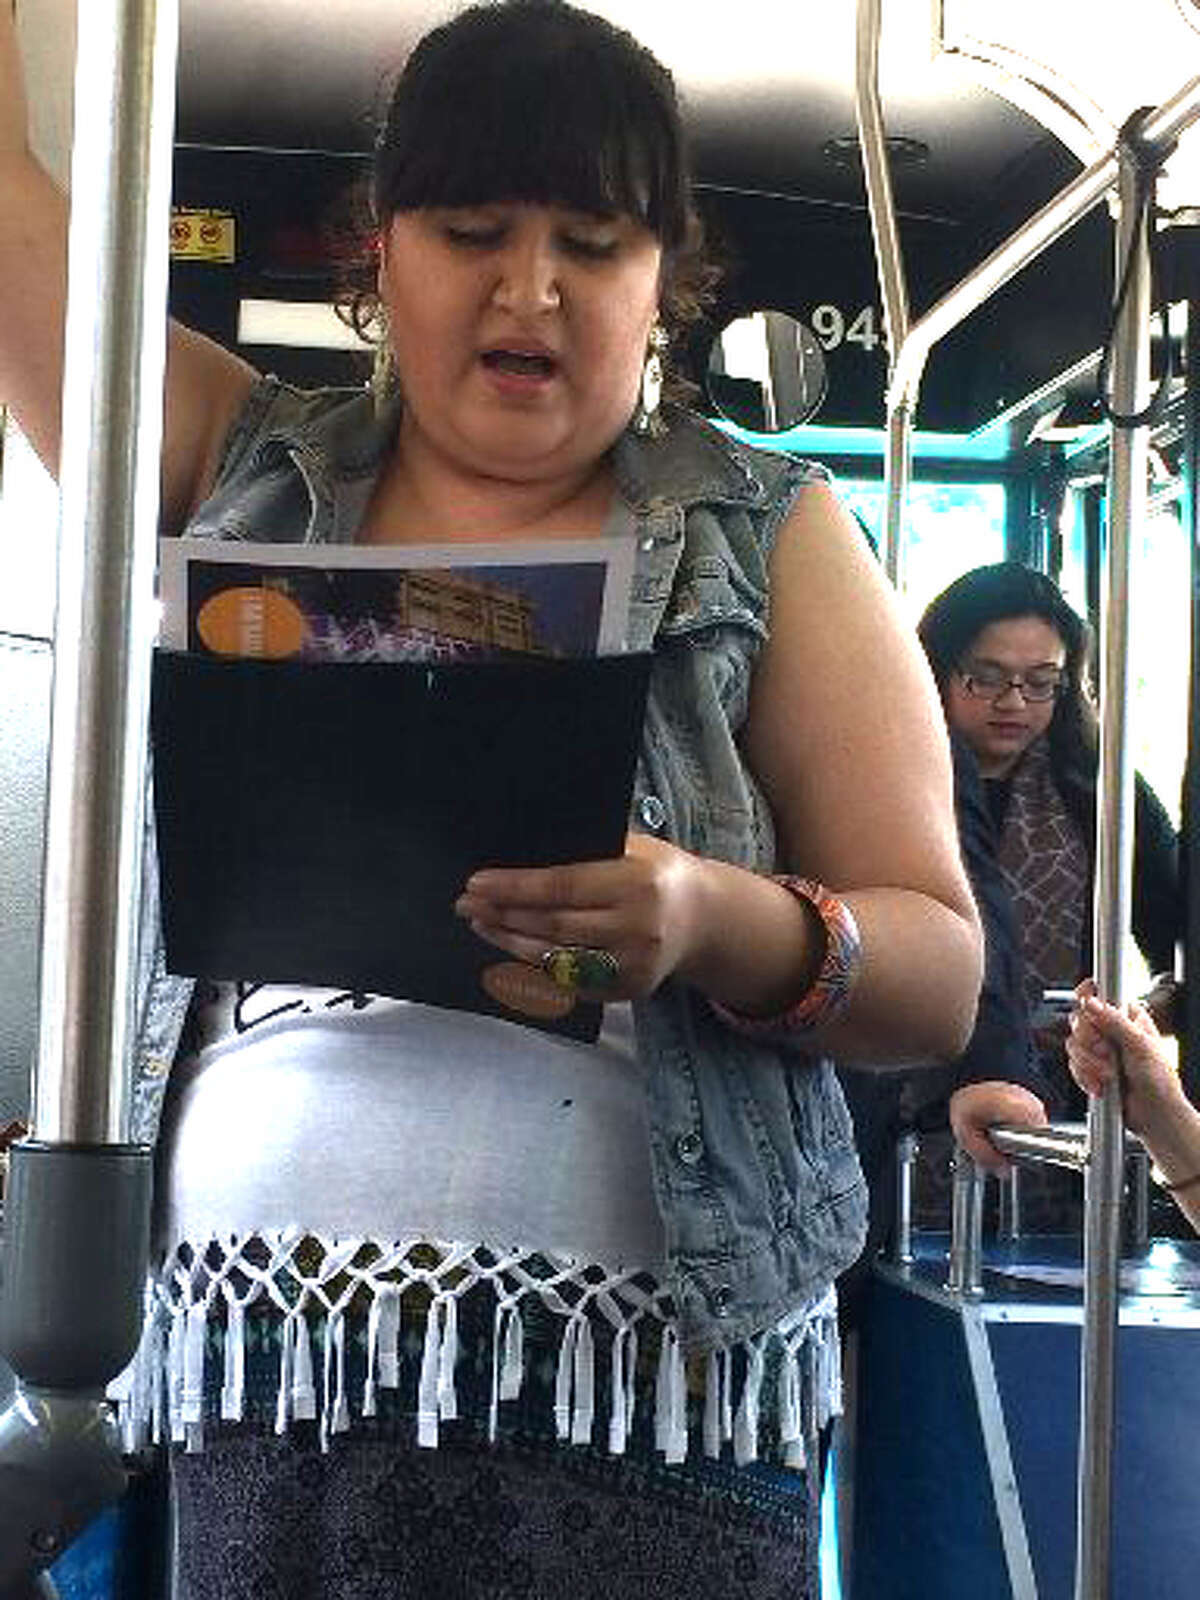 Bianca Sapet studies the lyrics for a song she was preparing to sing during a bus tour of the footprint for this year's Luminaria.